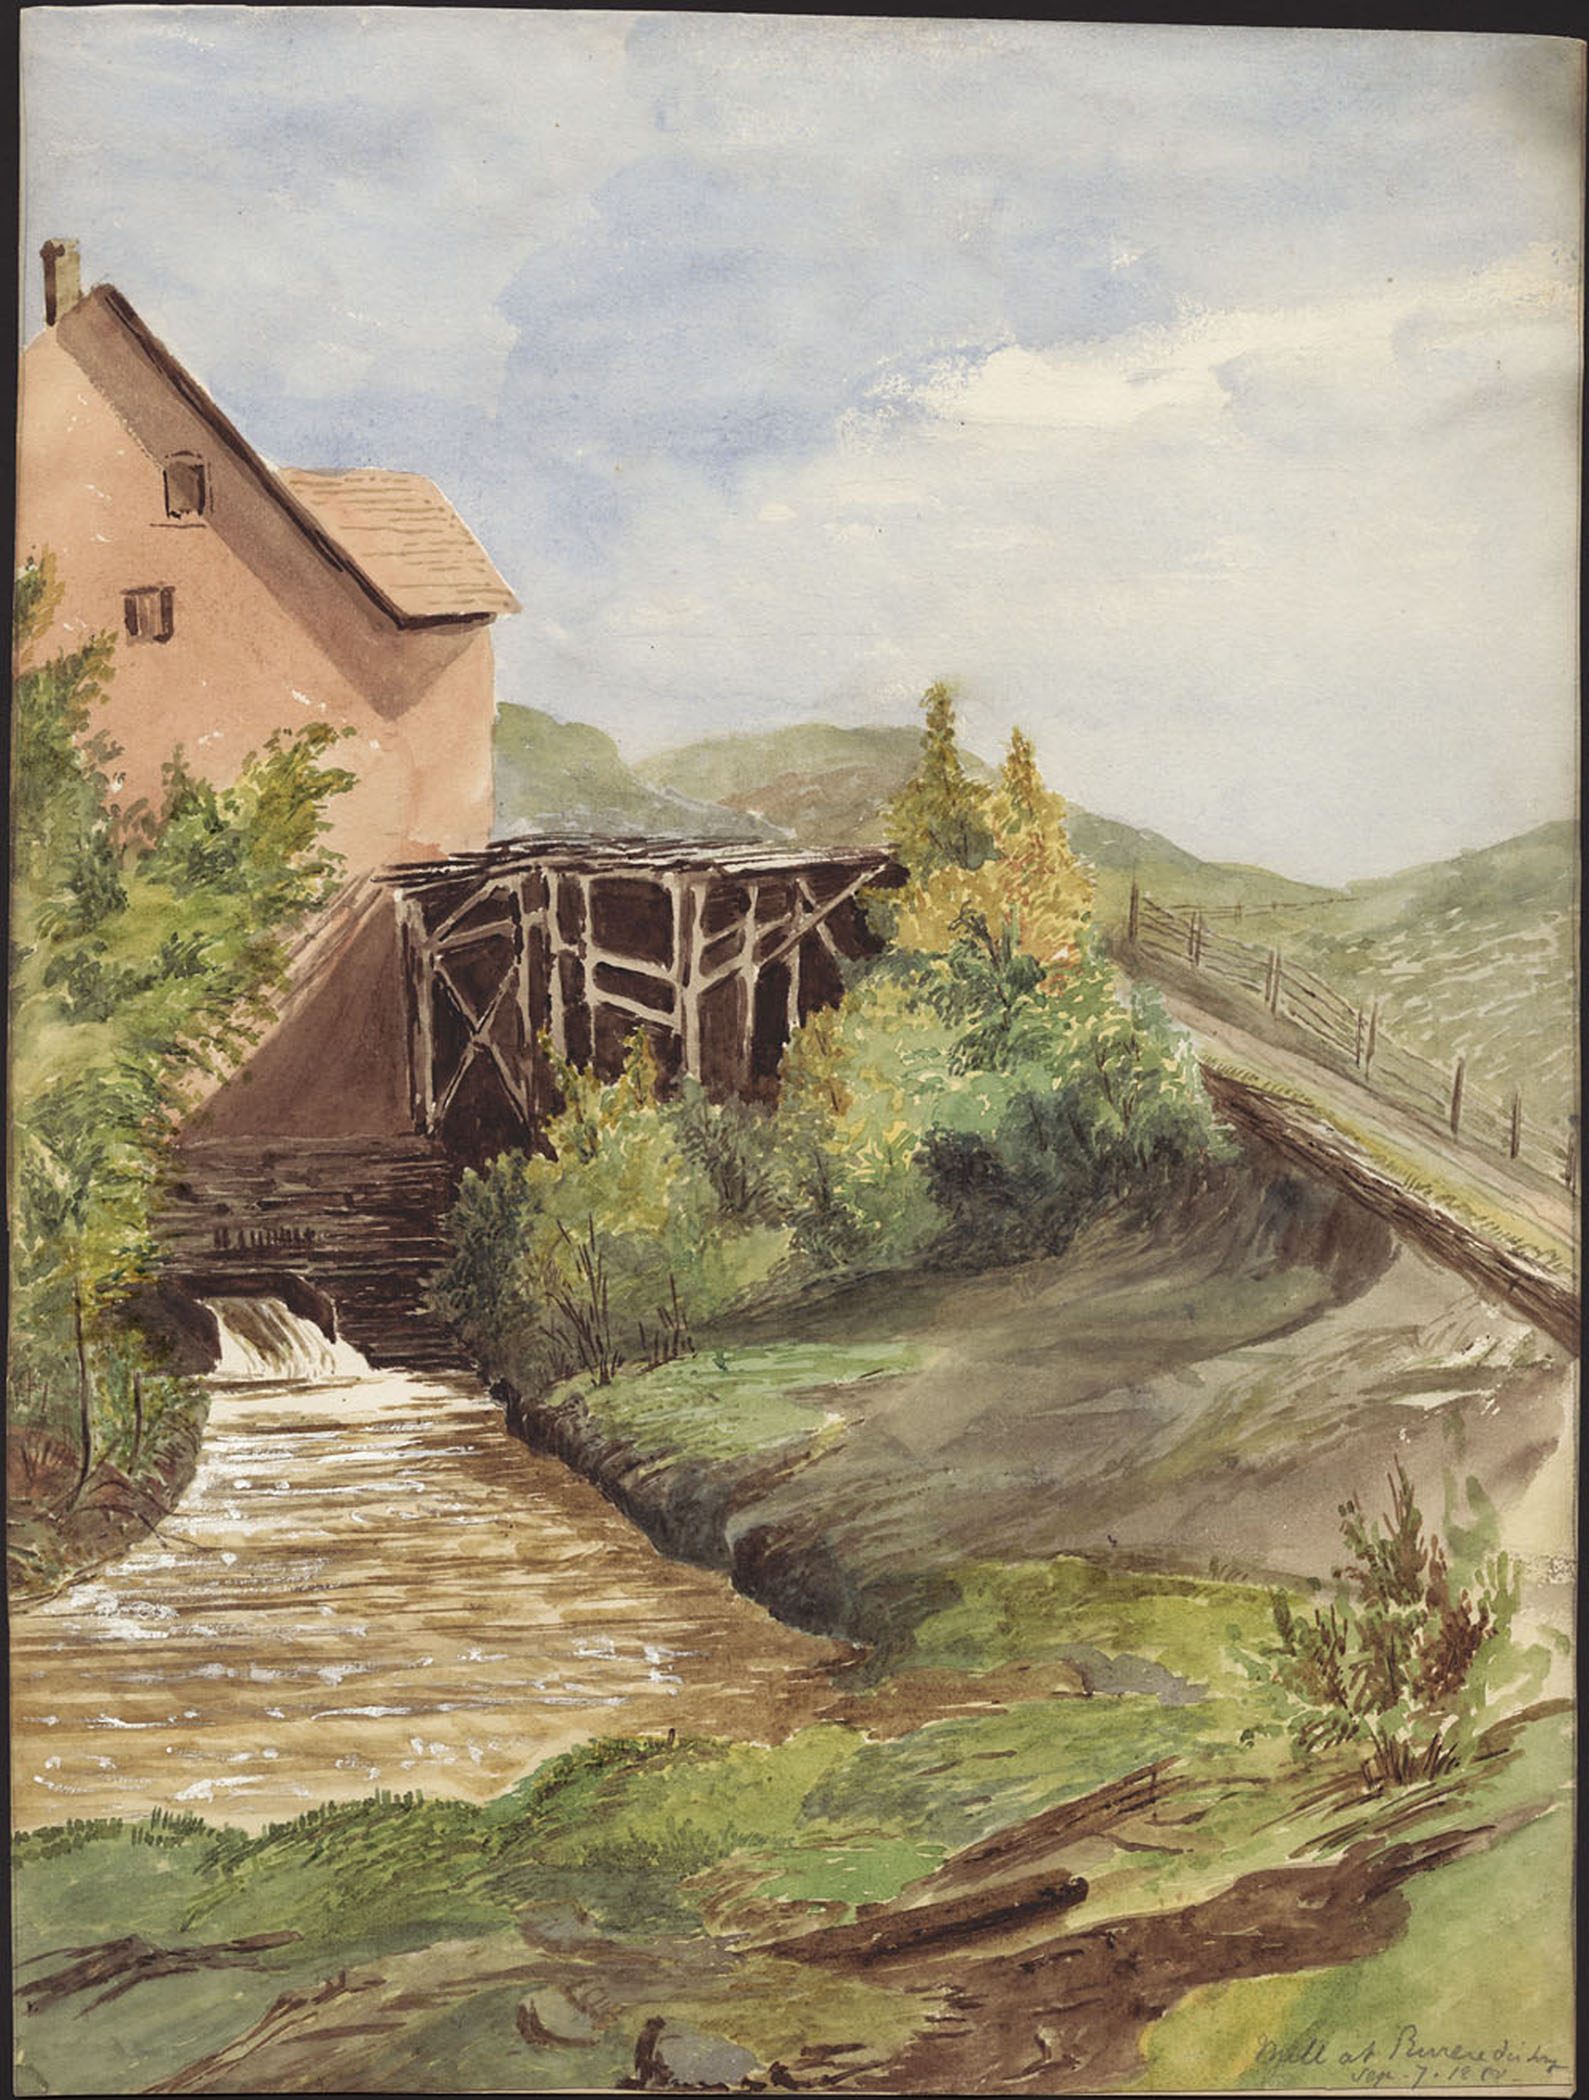 Watercolour painting of part of a tall building from the bottom of which a chute of water gushes into a waterway. A wooden structure is erected next to the building and shrubs grow next to the structure.